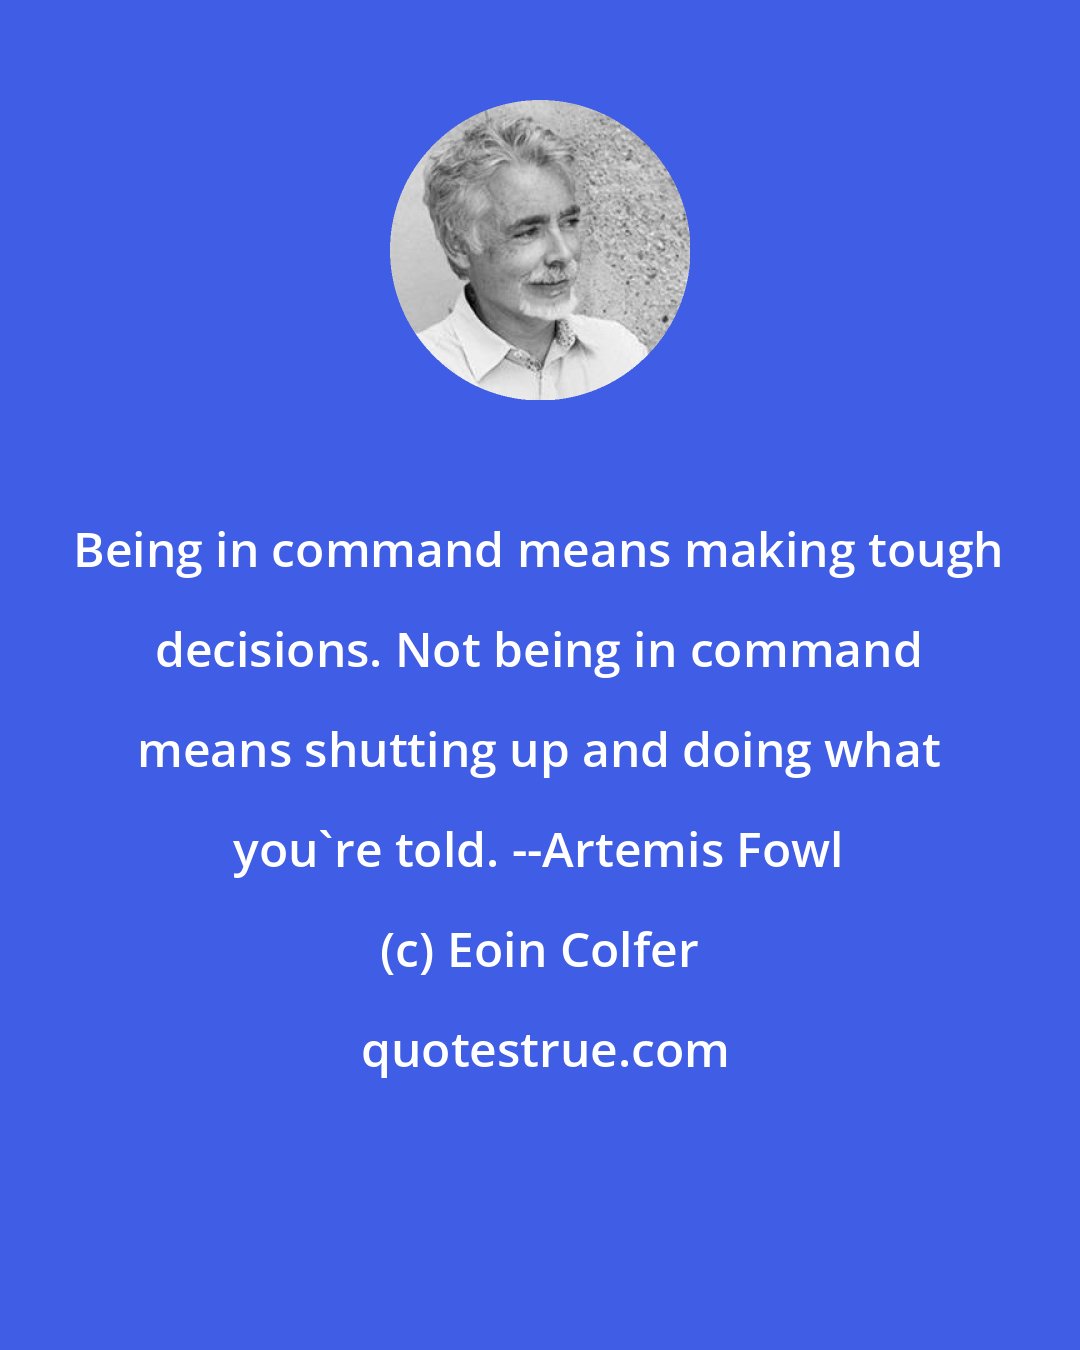 Eoin Colfer: Being in command means making tough decisions. Not being in command means shutting up and doing what you're told. --Artemis Fowl